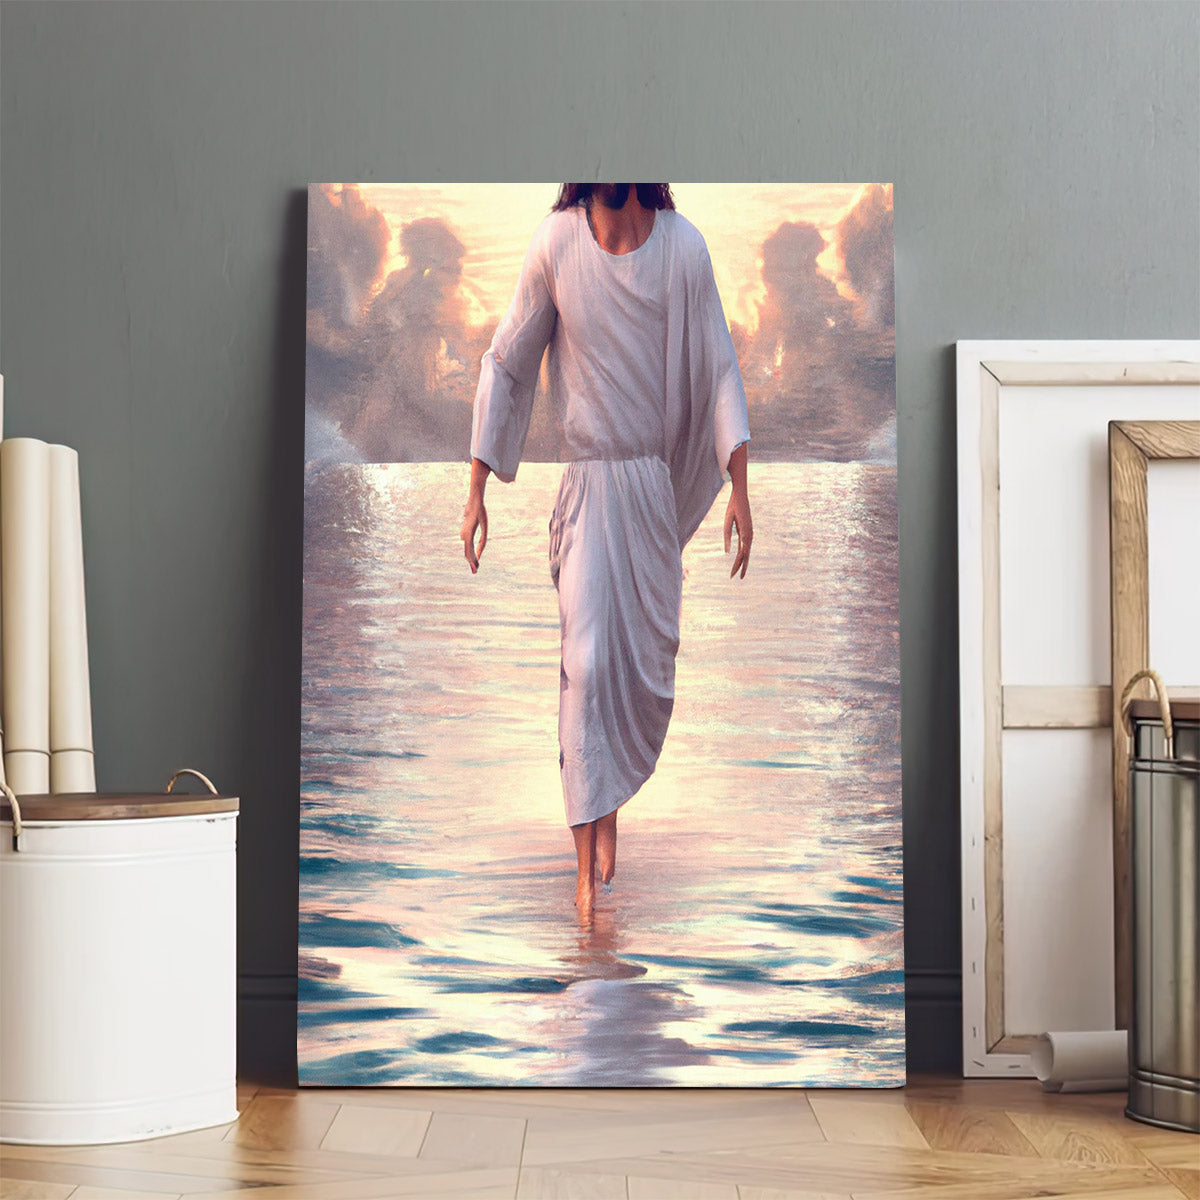 Jesus Walking On Water - Canvas Pictures - Jesus Canvas Art - Christian Wall Art